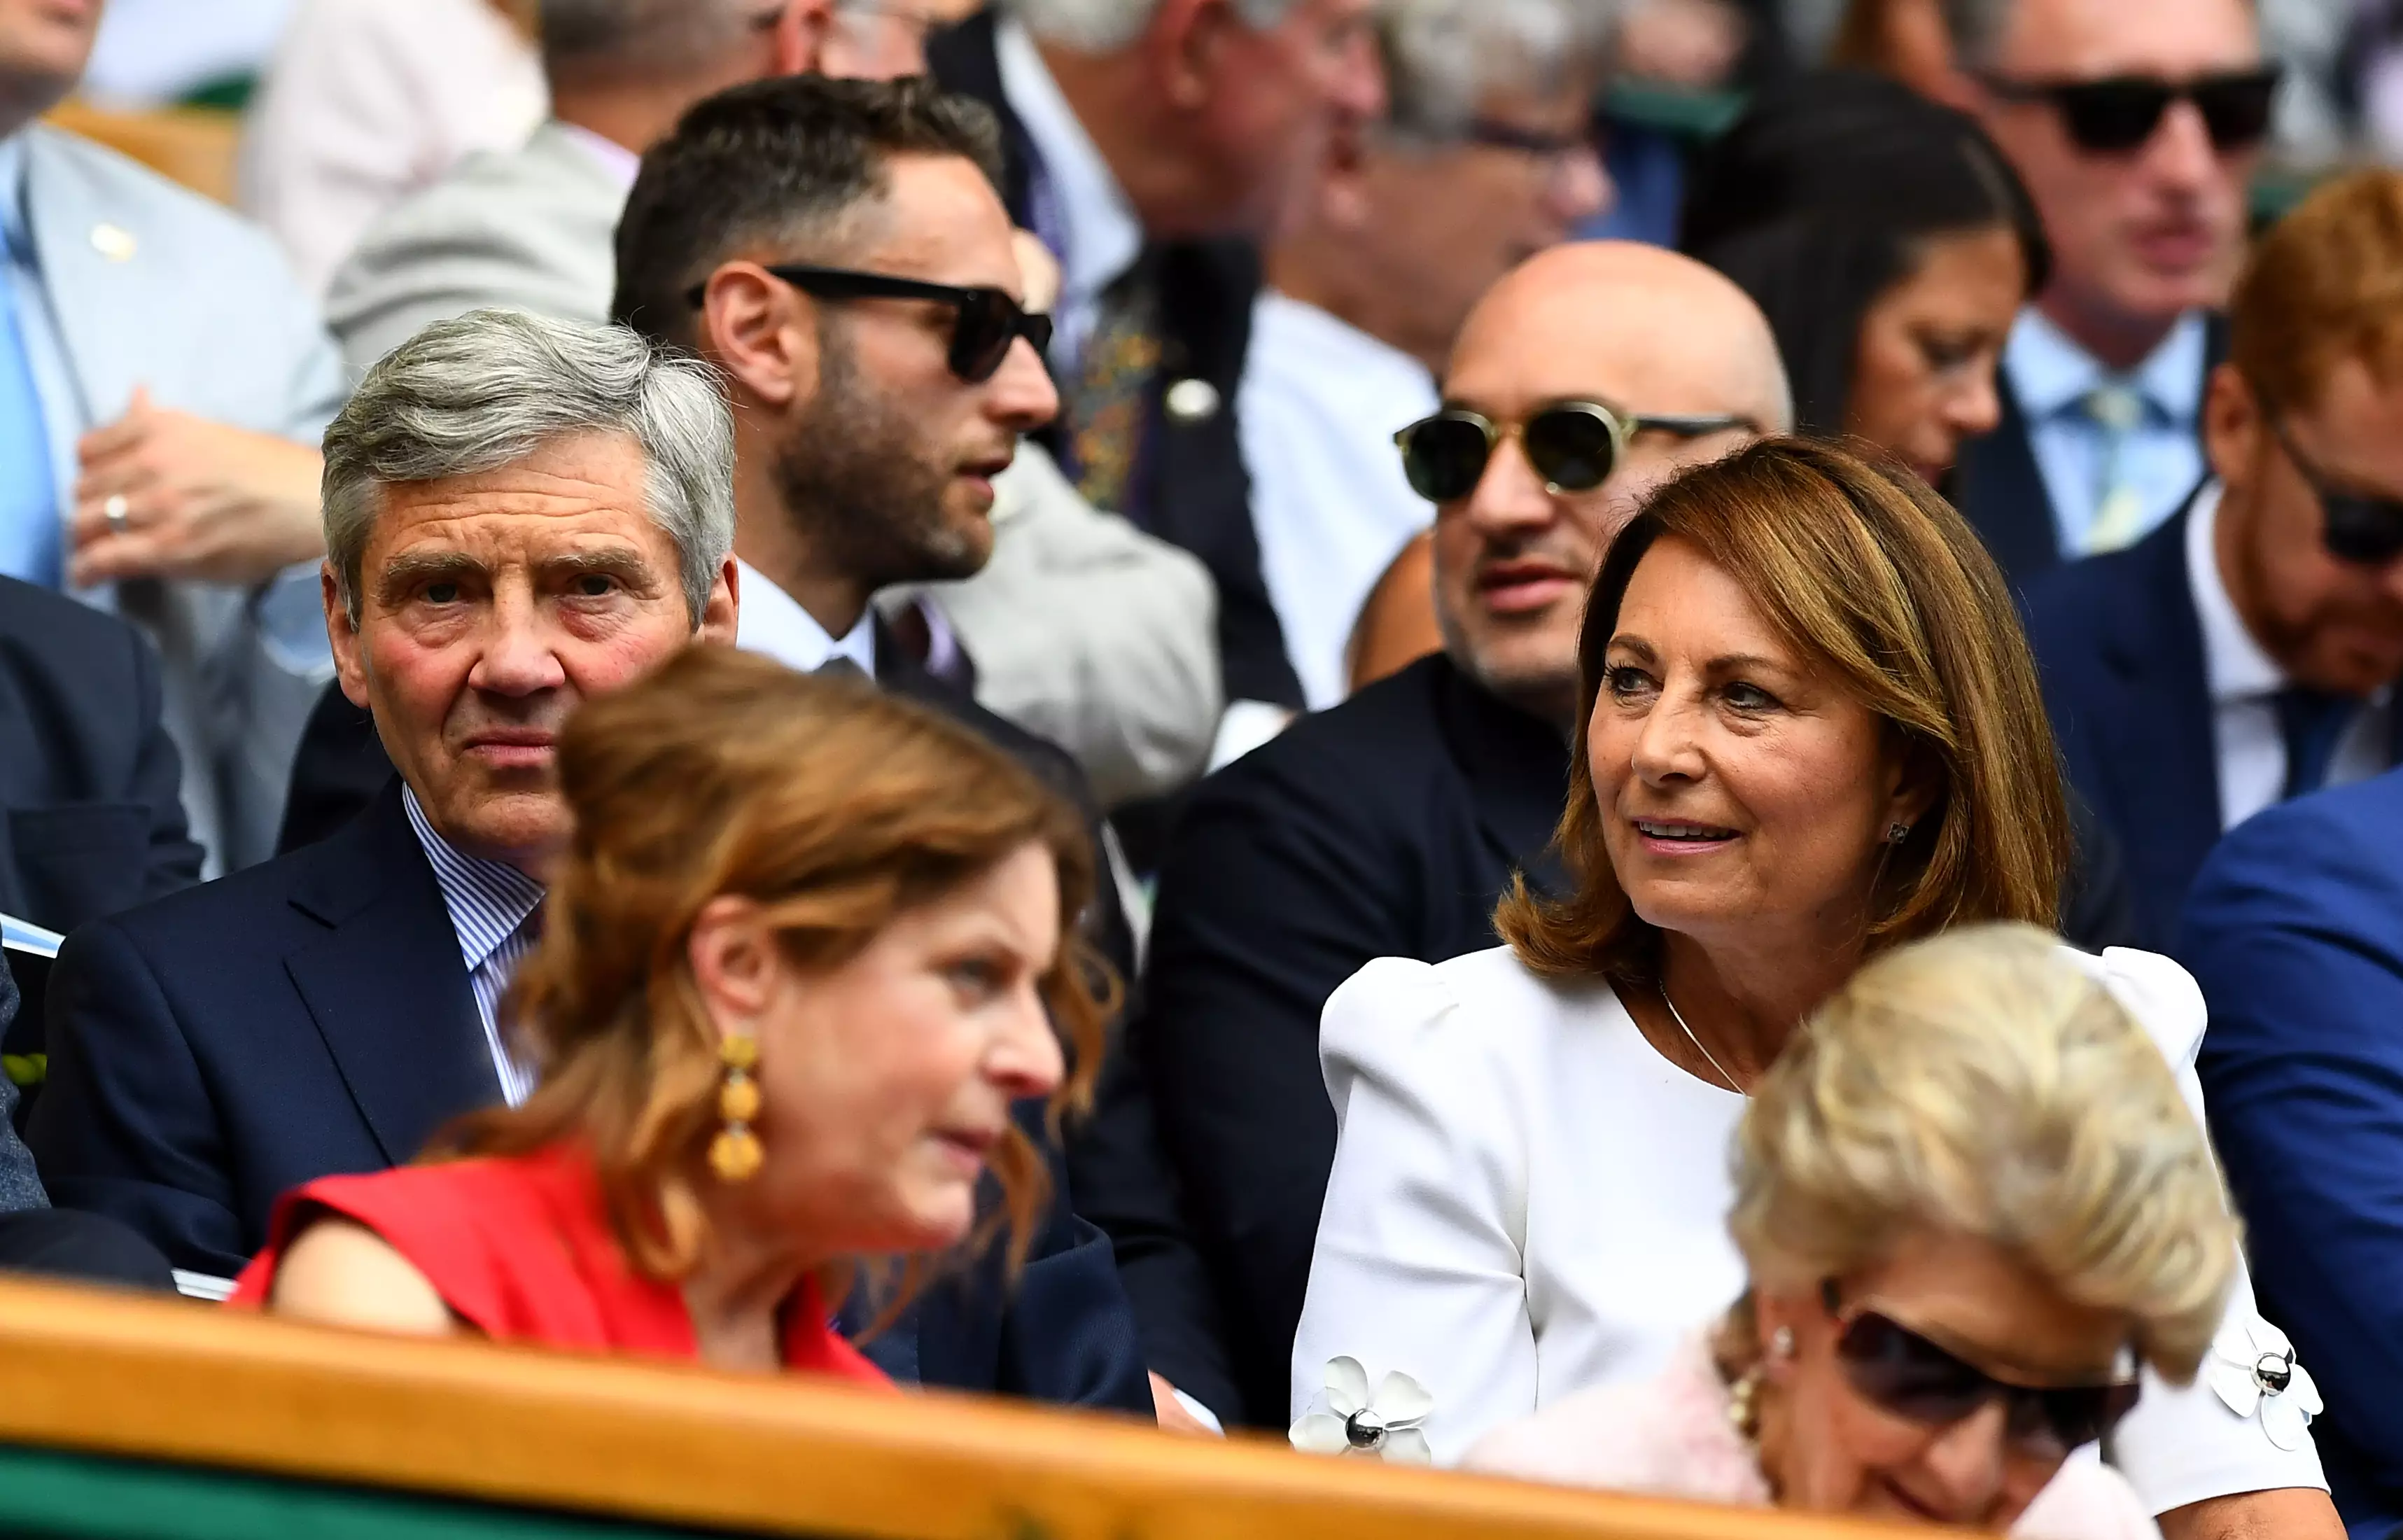 Carole and Michael Middleton at the Wimbledon championships in 2019 (